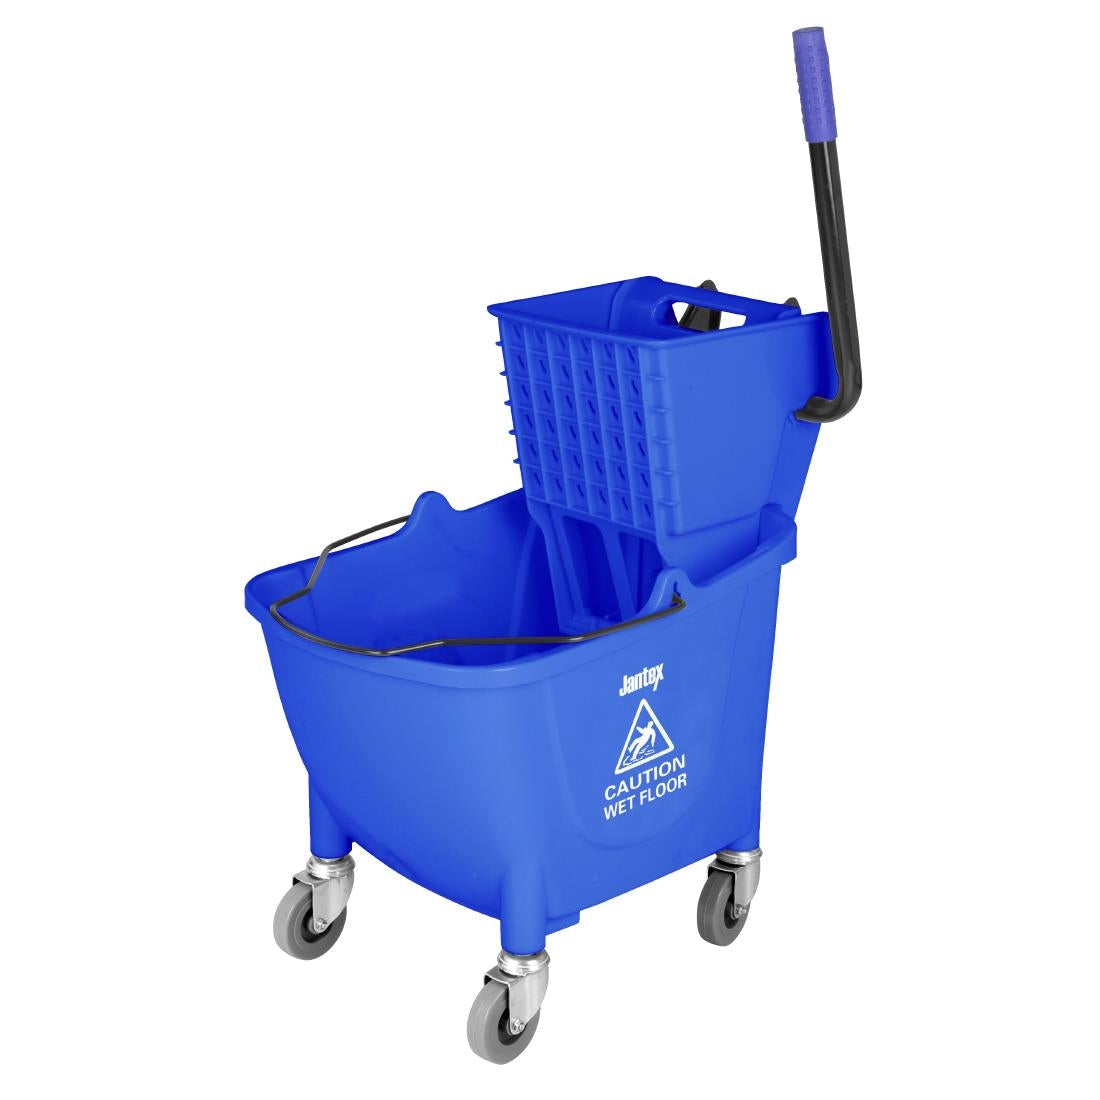 Jantex 30ltr Mop Bucket with Foot Pedal release - Blue